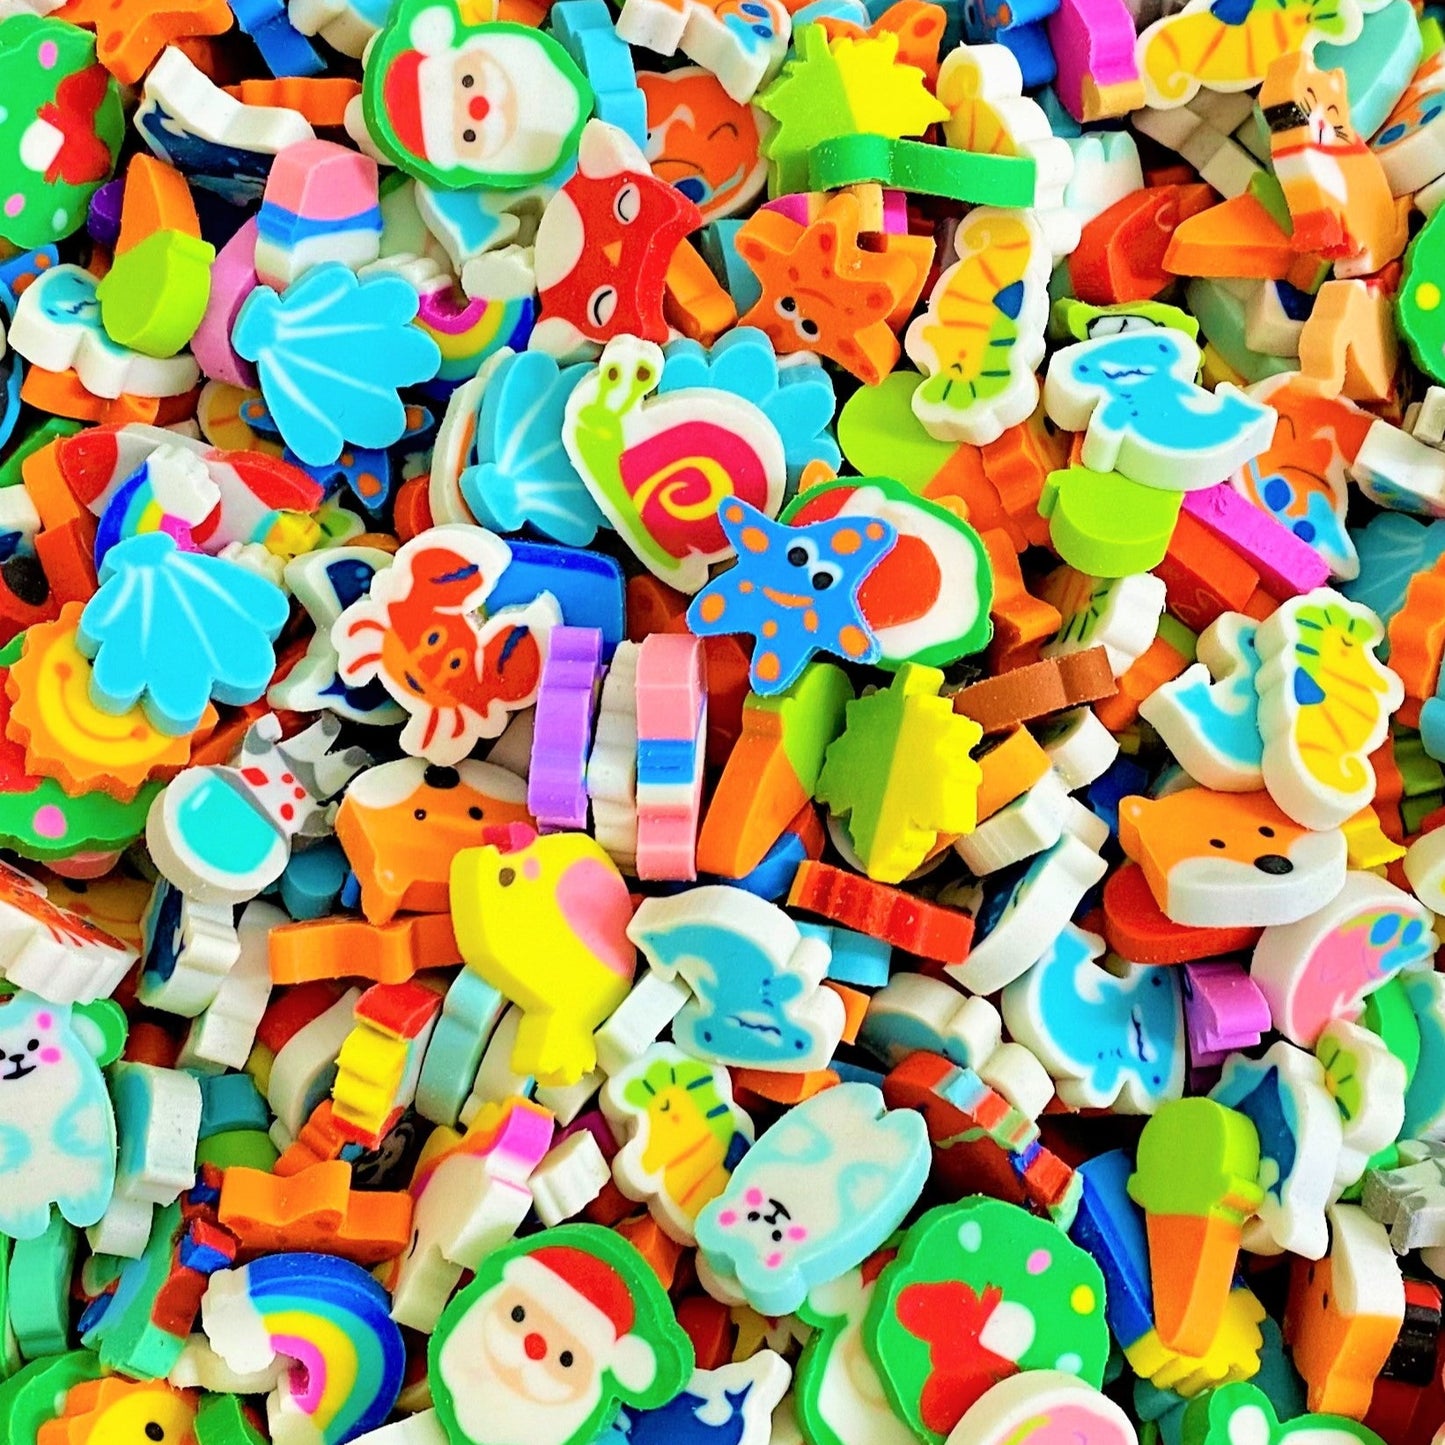 FunErasers-Collectible Mini Eraser Mystery Packs